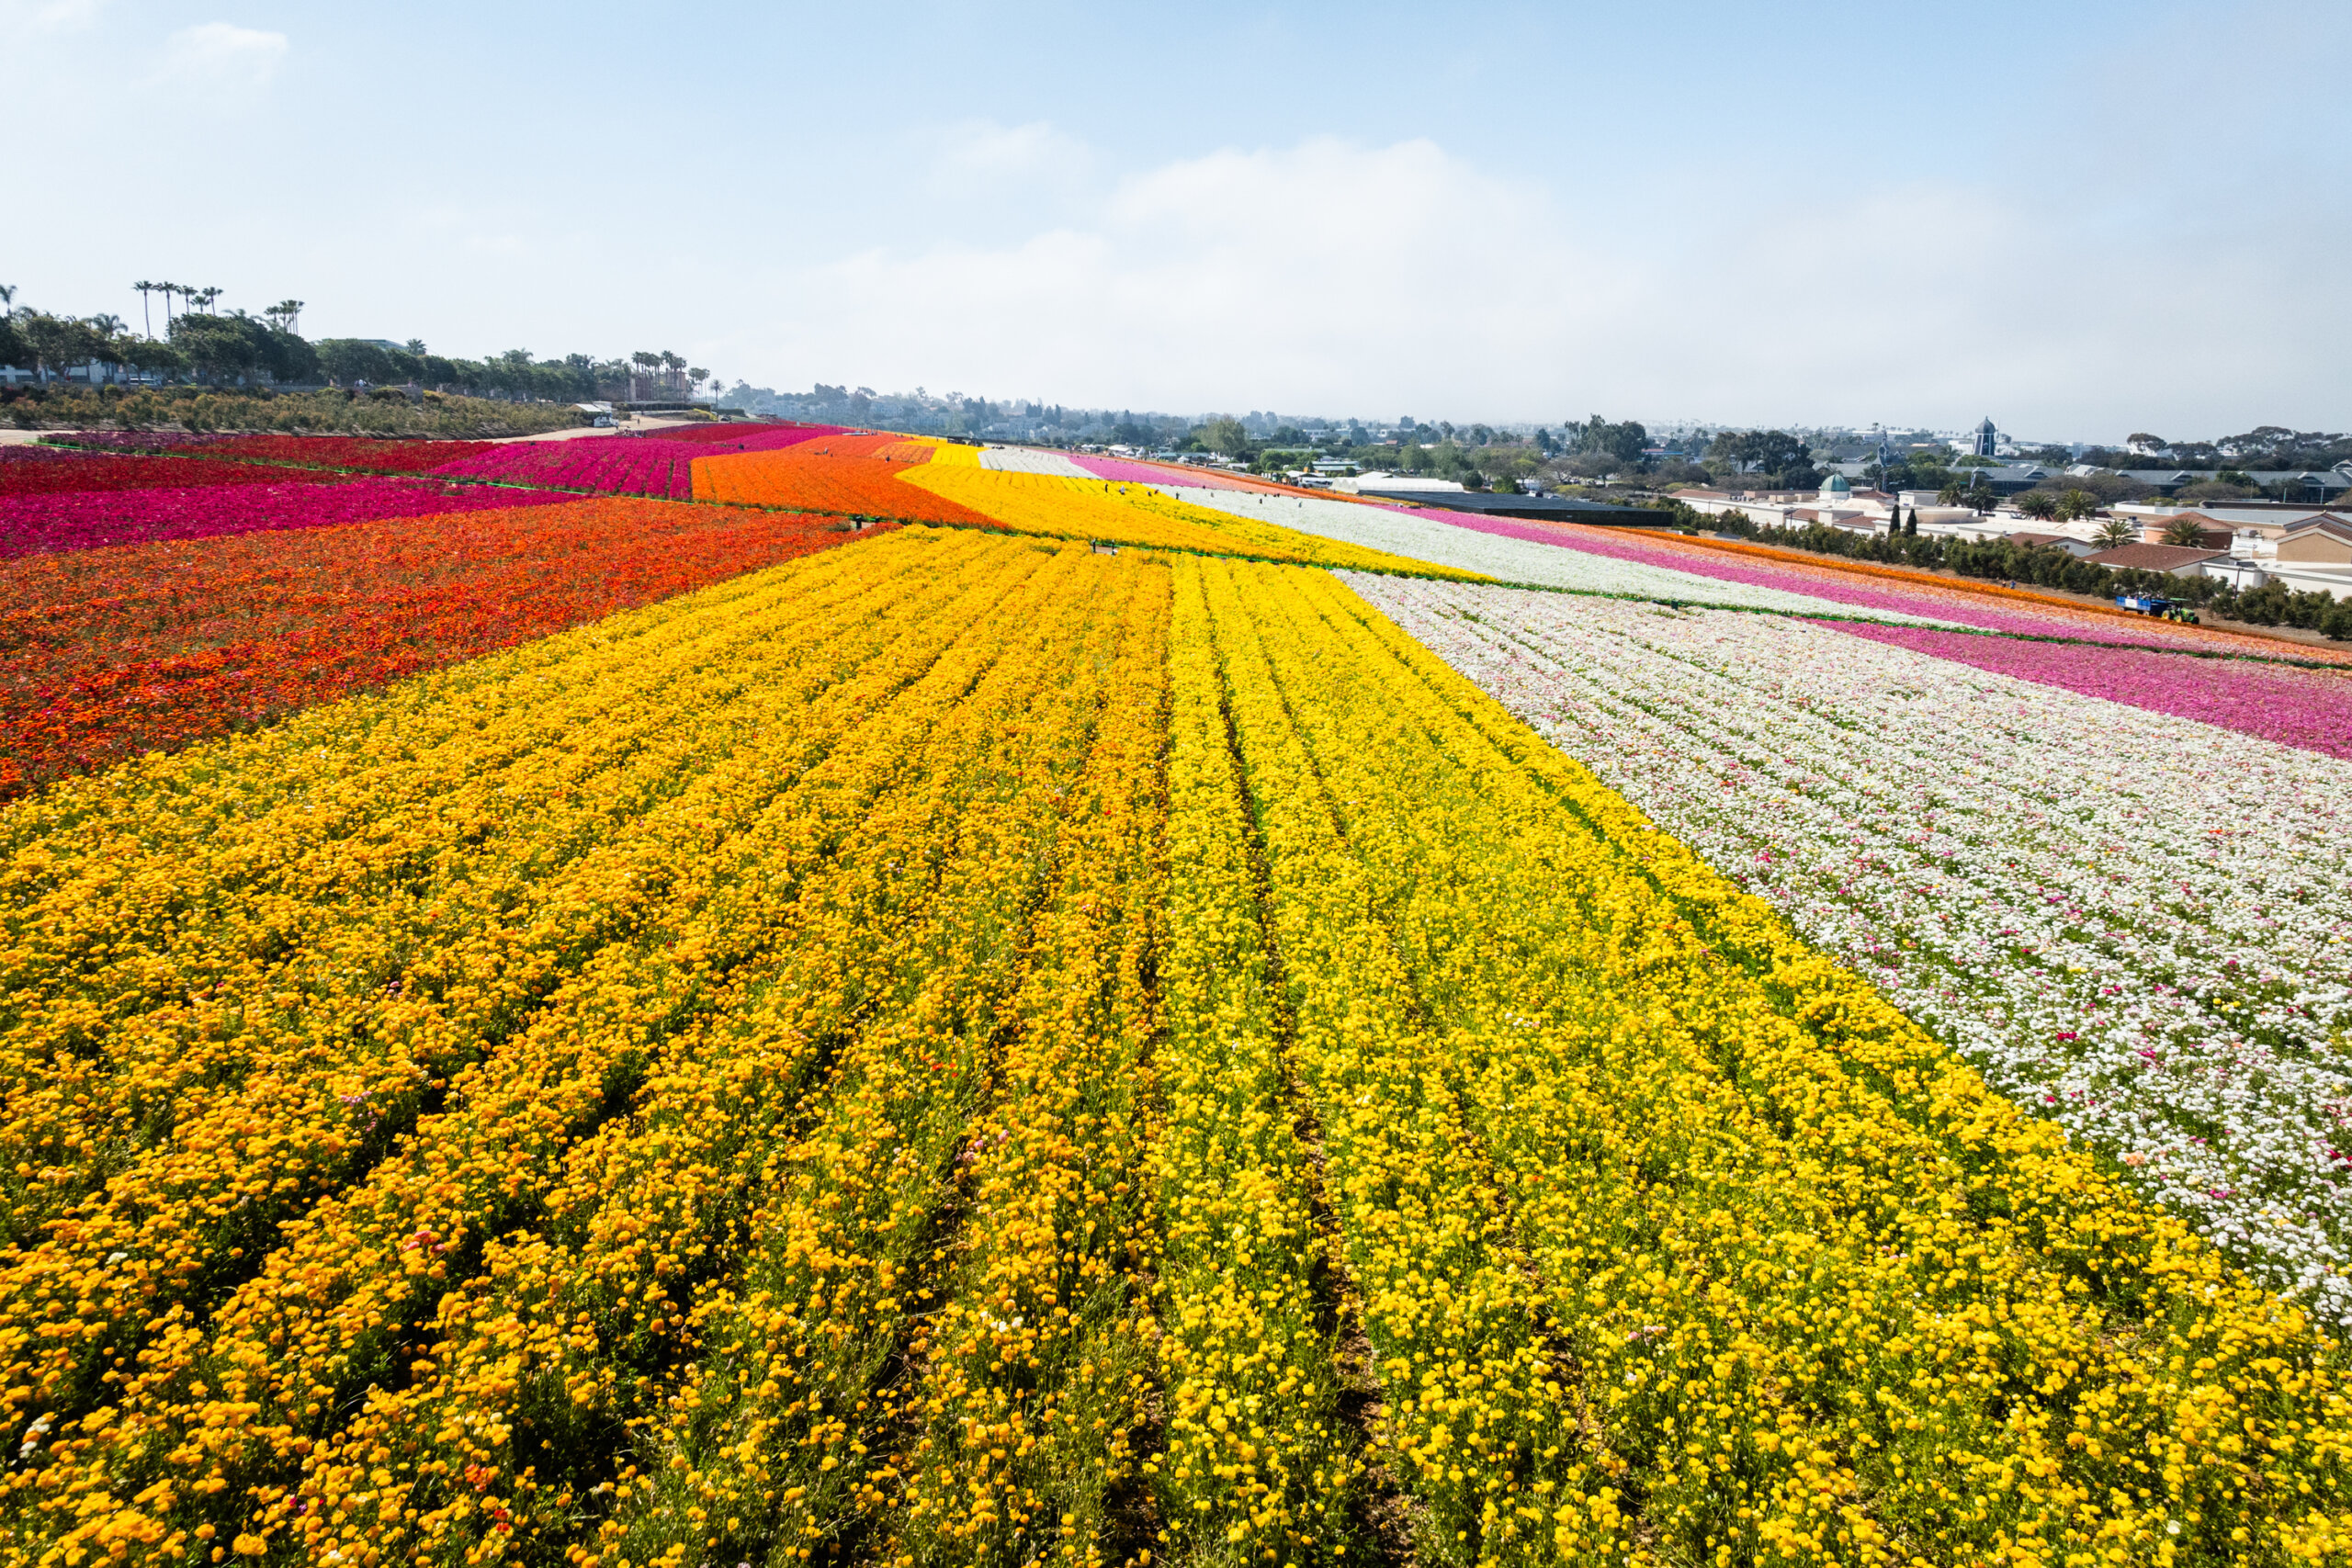 Vibrant colors of ranunculus planted in rows at The Flower Fields